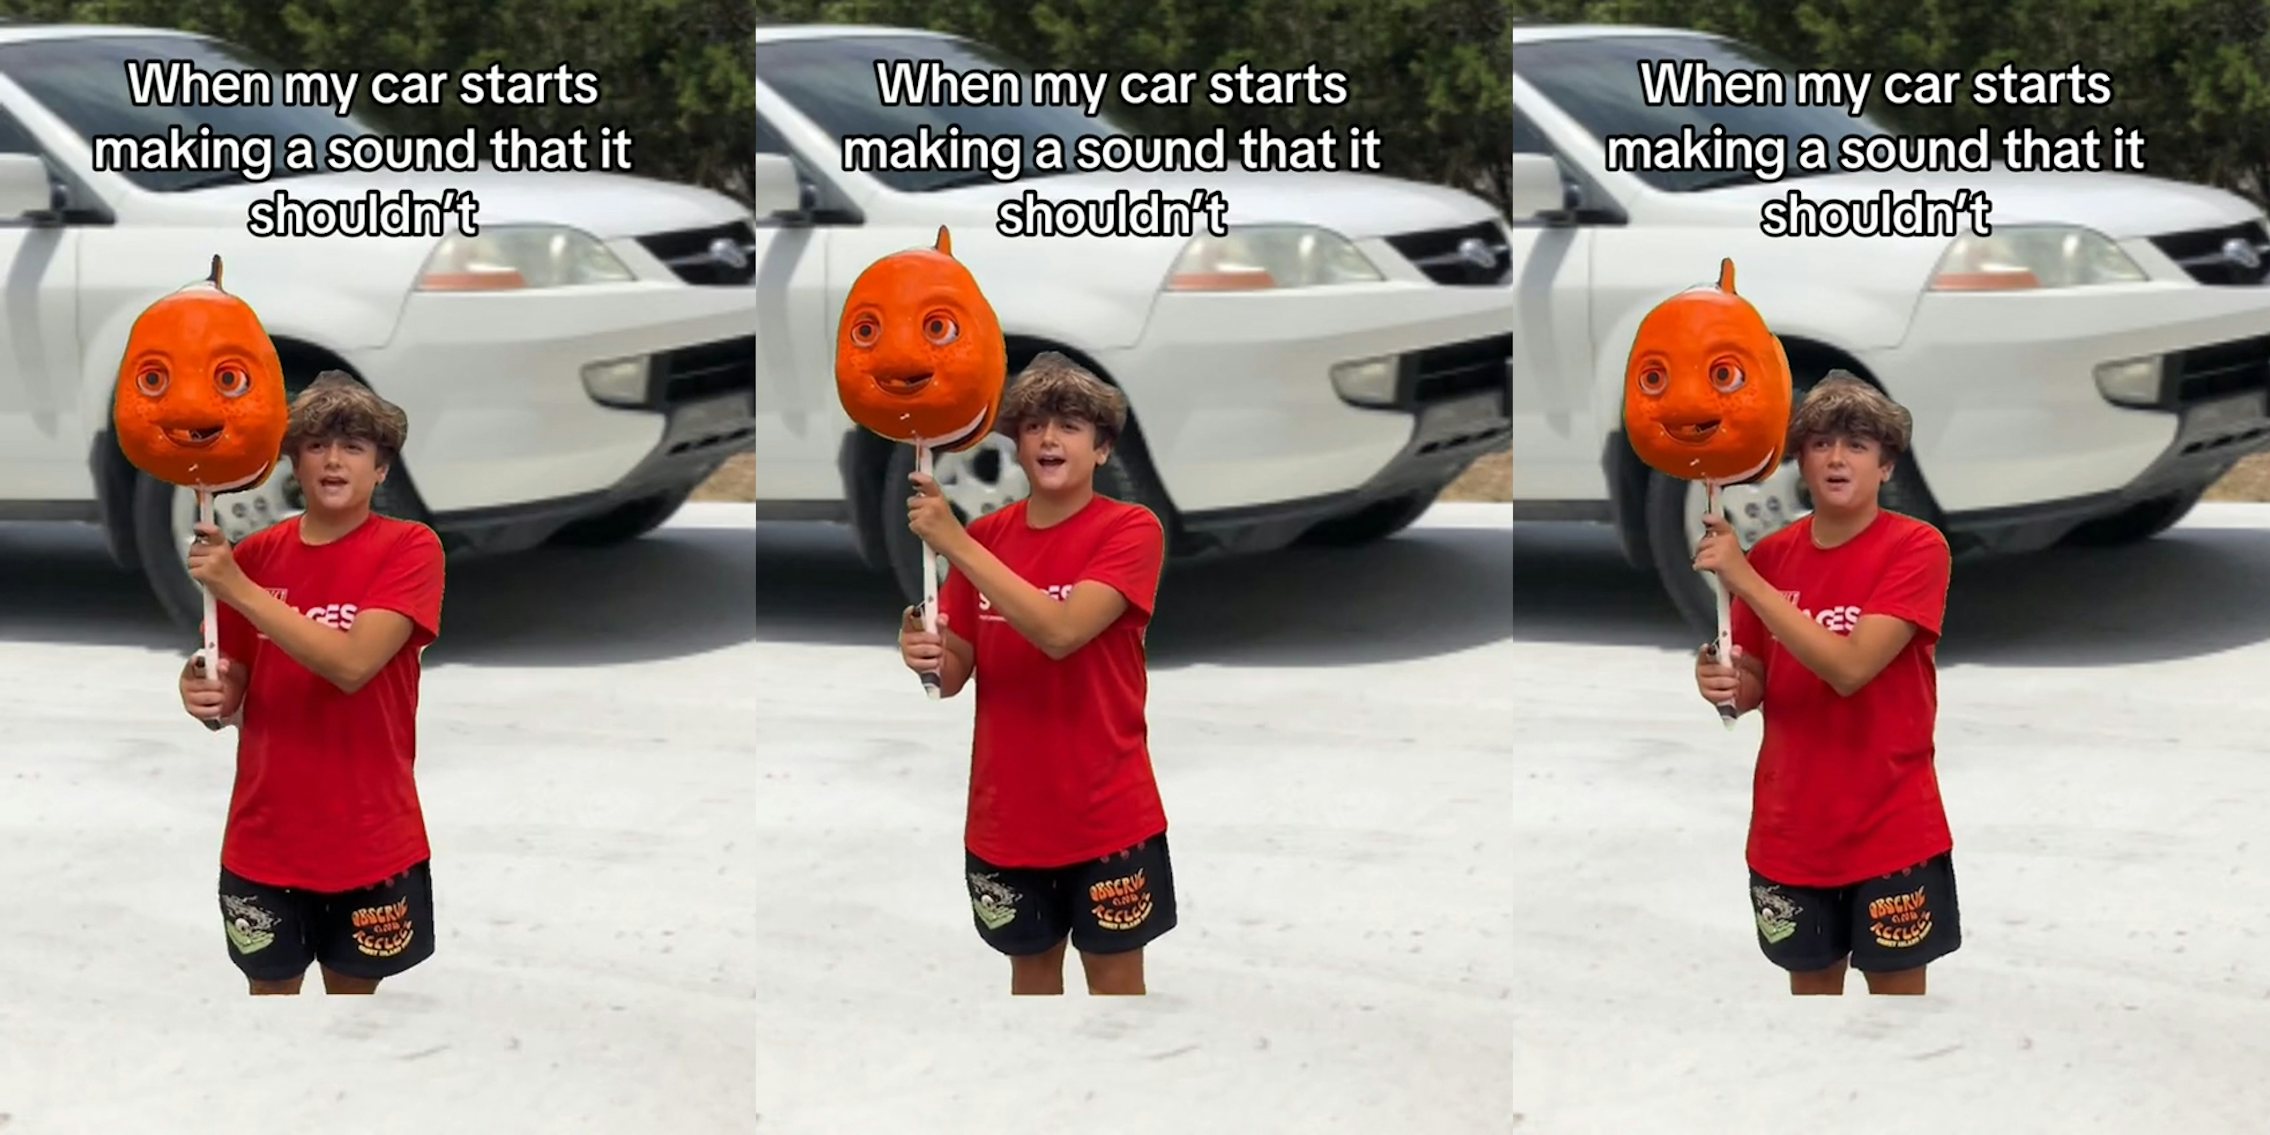 kid singing holding Nemo on stick in front of image of car with caption 'When my car starts making a sound that it shouldn't' (l) kid singing holding Nemo on stick in front of image of car with caption 'When my car starts making a sound that it shouldn't' (c) kid singing holding Nemo on stick in front of image of car with caption 'When my car starts making a sound that it shouldn't' (r)